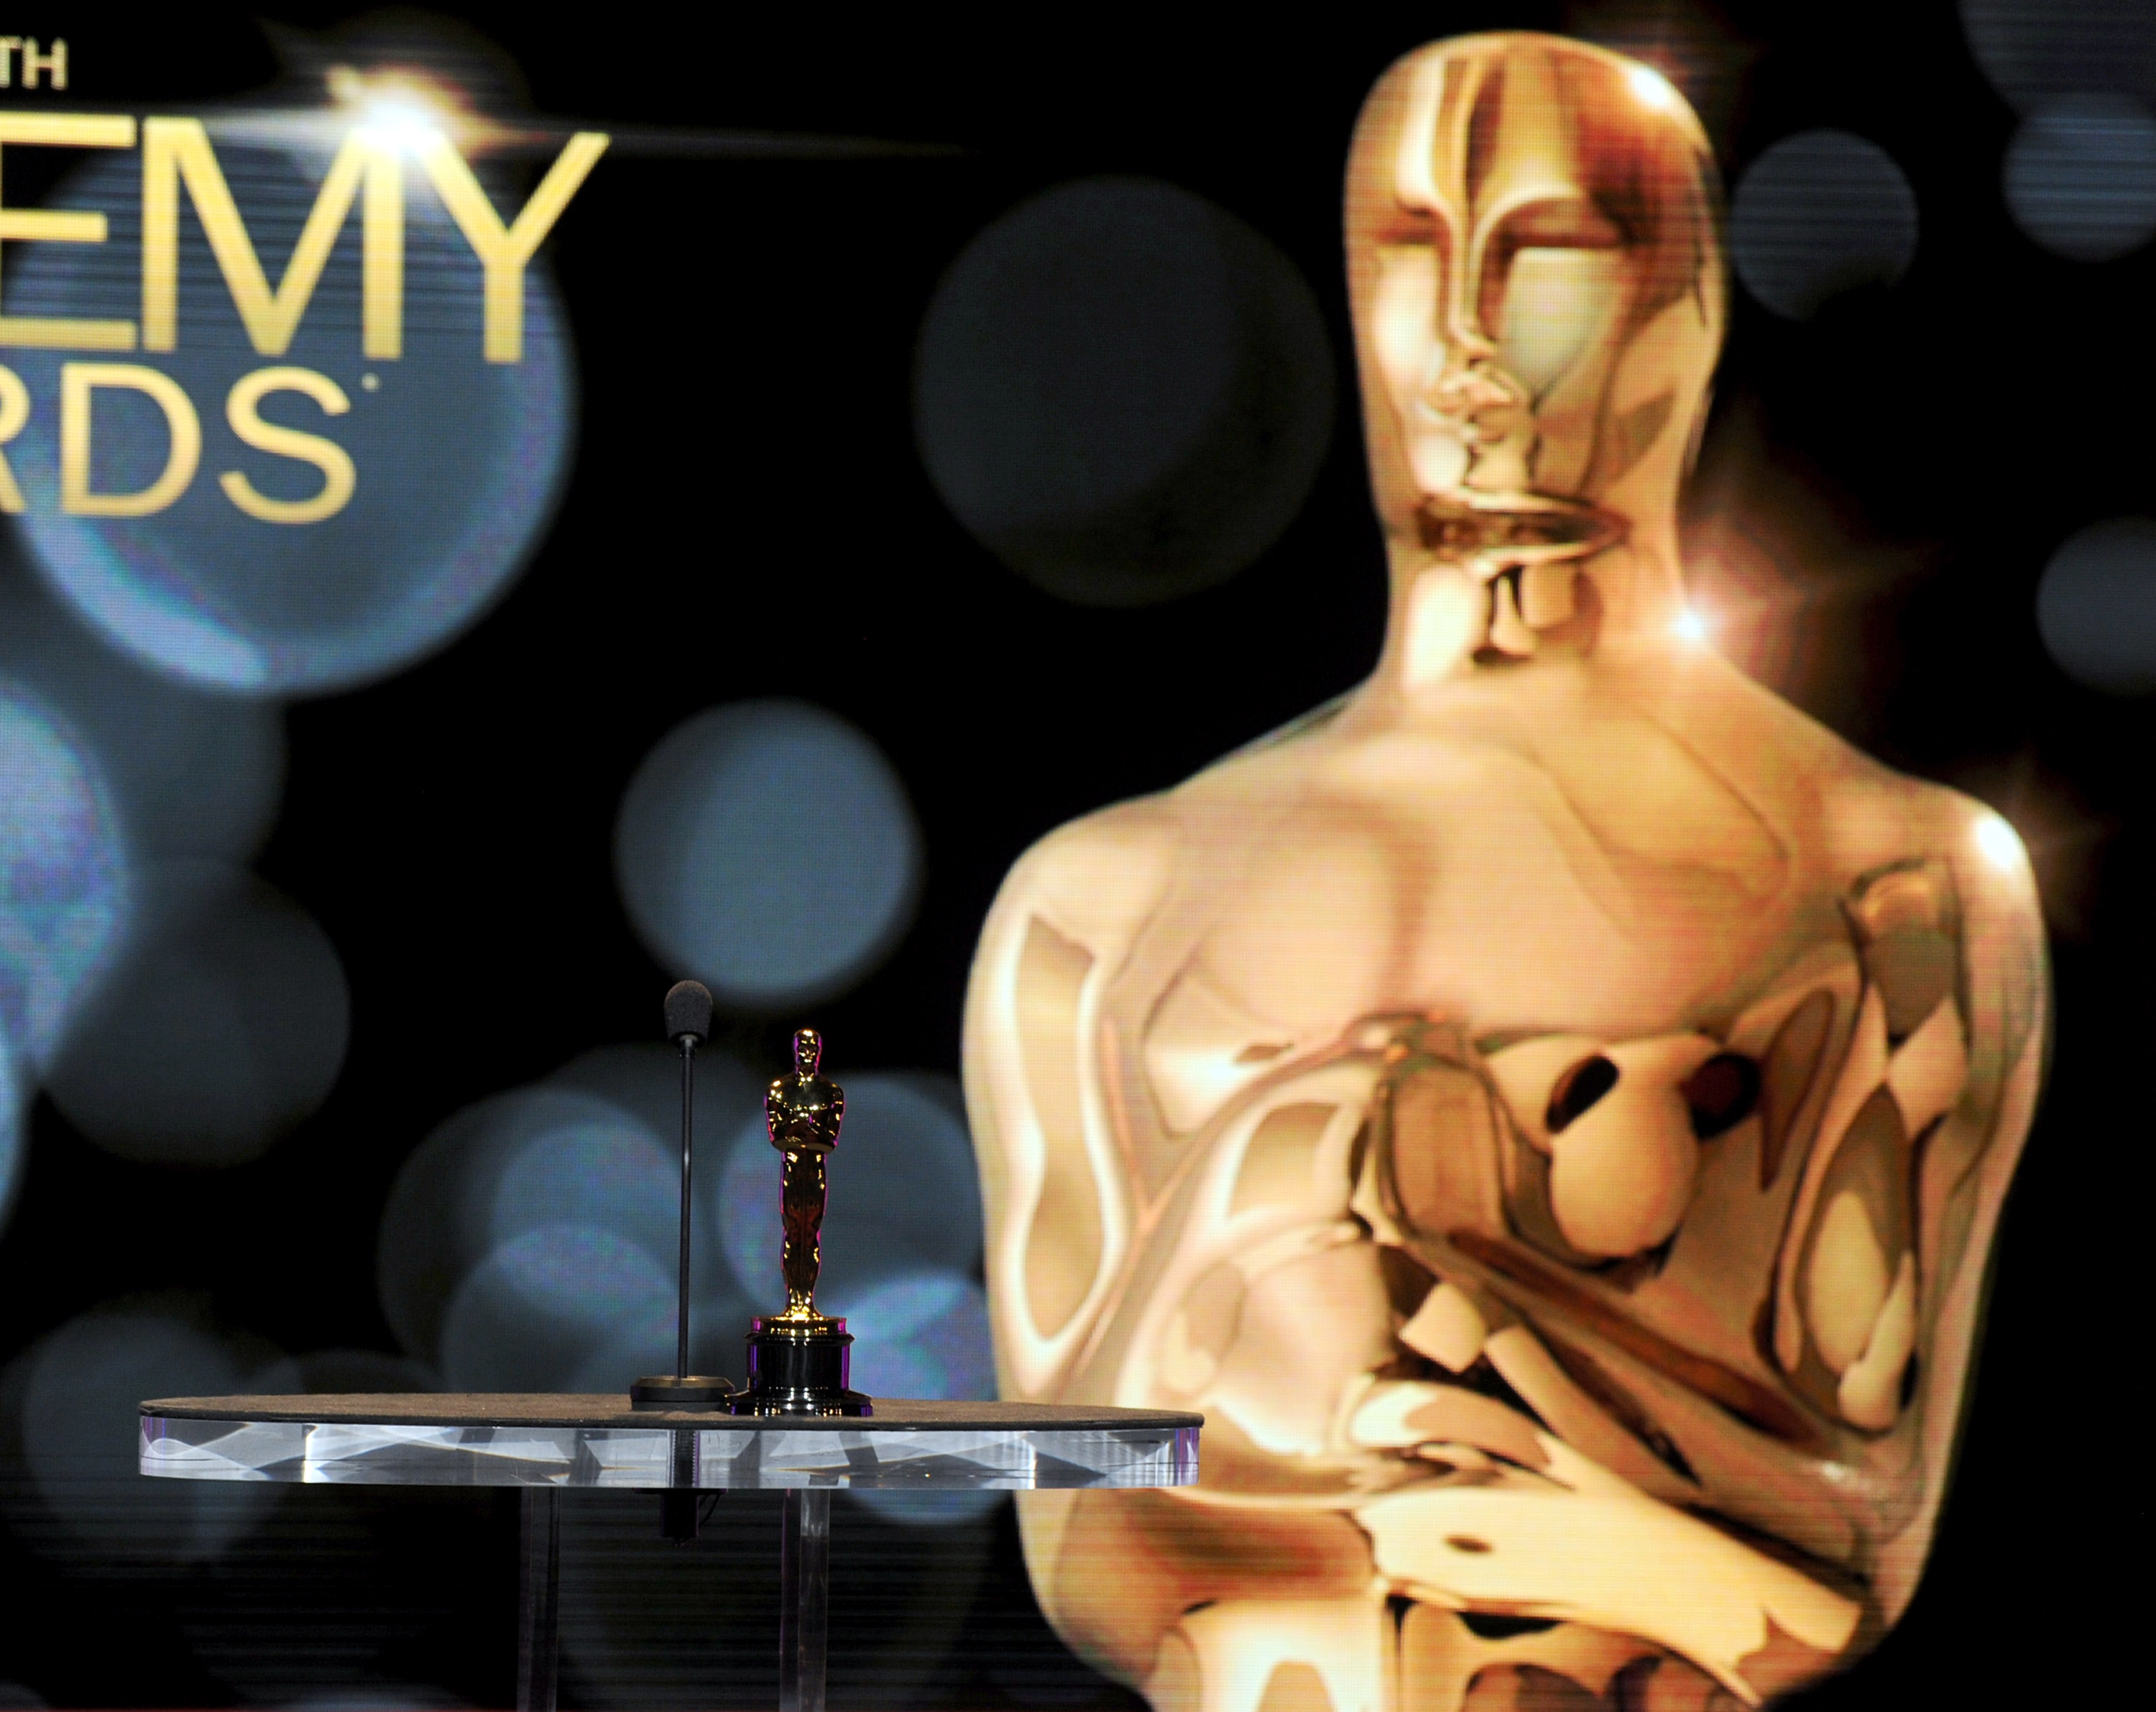 84th Academy Awards Nominations Announcement